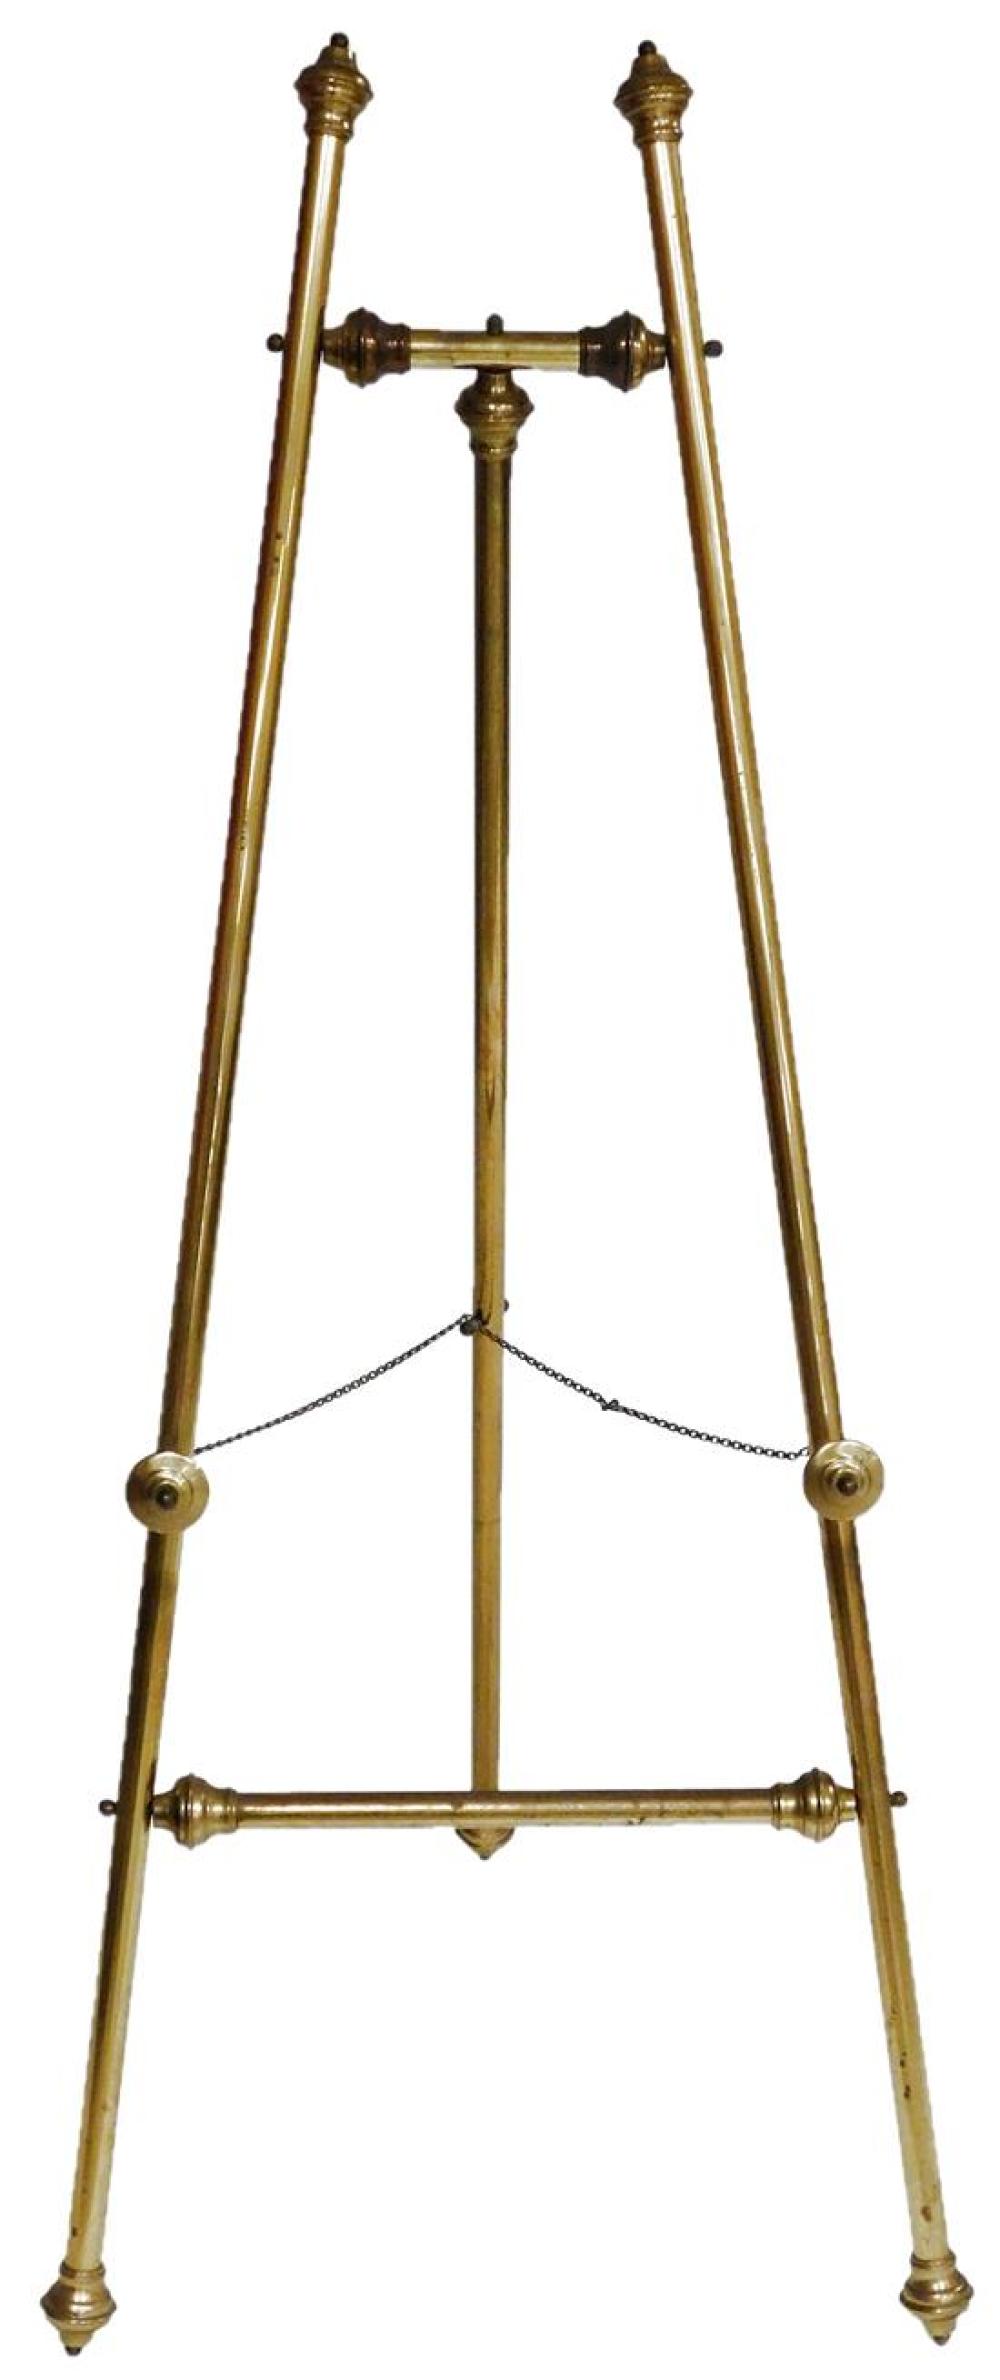 BRASS FLOOR EASEL, LATE 19TH C./MID